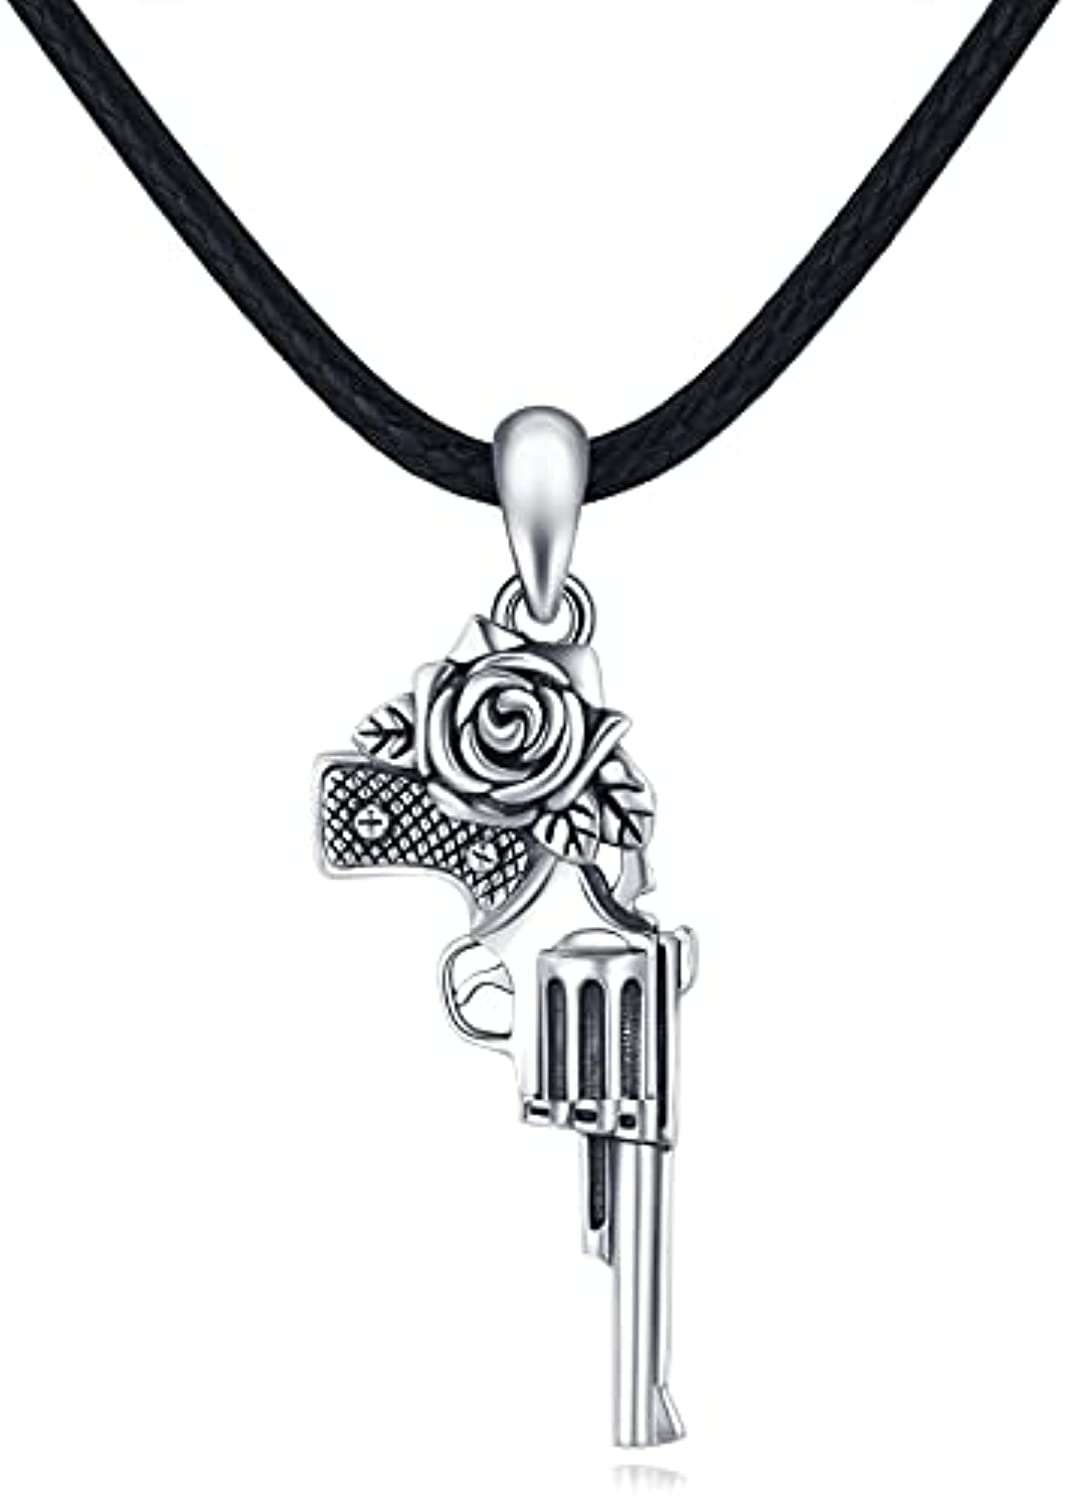 S925 Sterling Silver Rose Gun Pendant Necklace For Men Women,Military Style Unisex Punk Rapper Jewelry Gun Weapon Charm Pendant Necklaces - Niki Ice Jewelry 